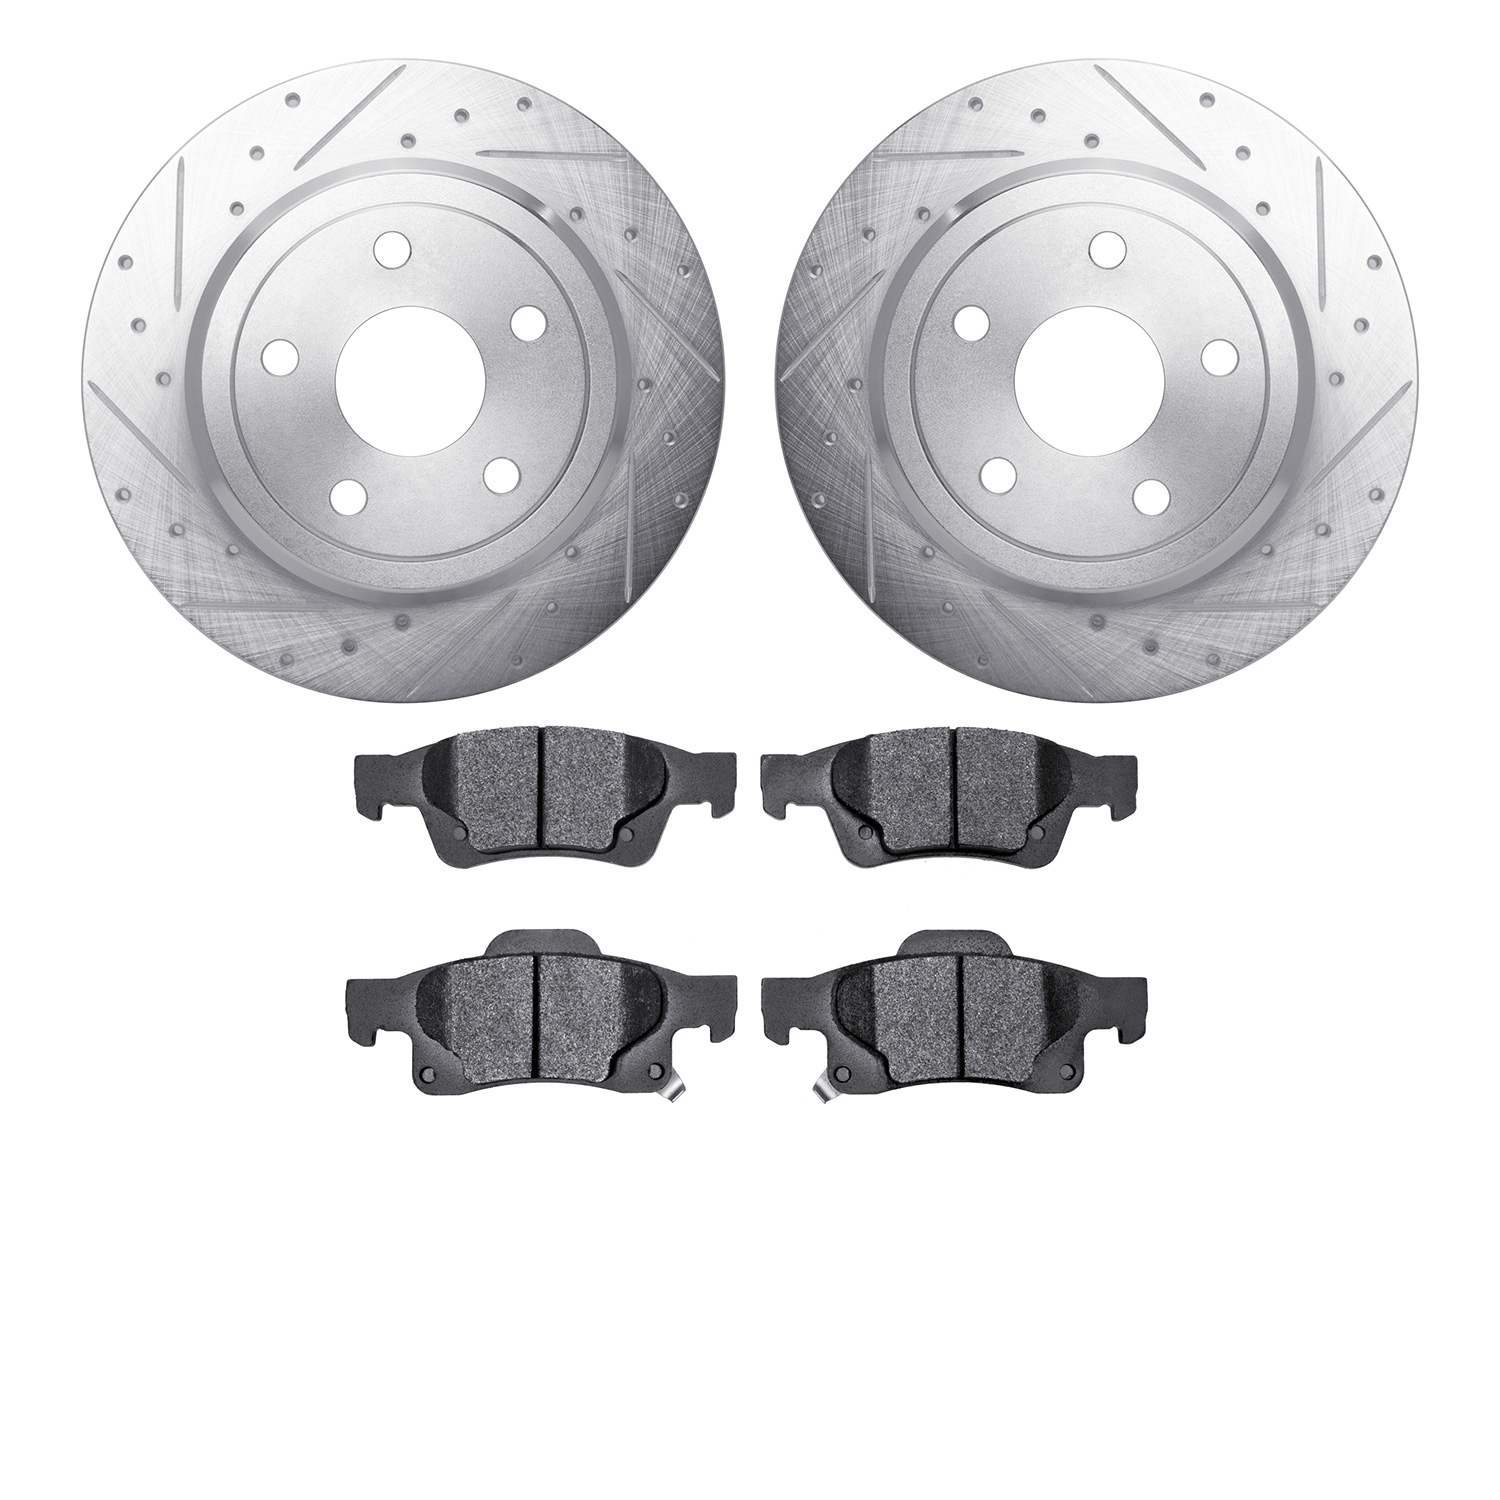 7402-42005 Drilled/Slotted Brake Rotors with Ultimate-Duty Brake Pads Kit [Silver], Fits Select Mopar, Position: Rear